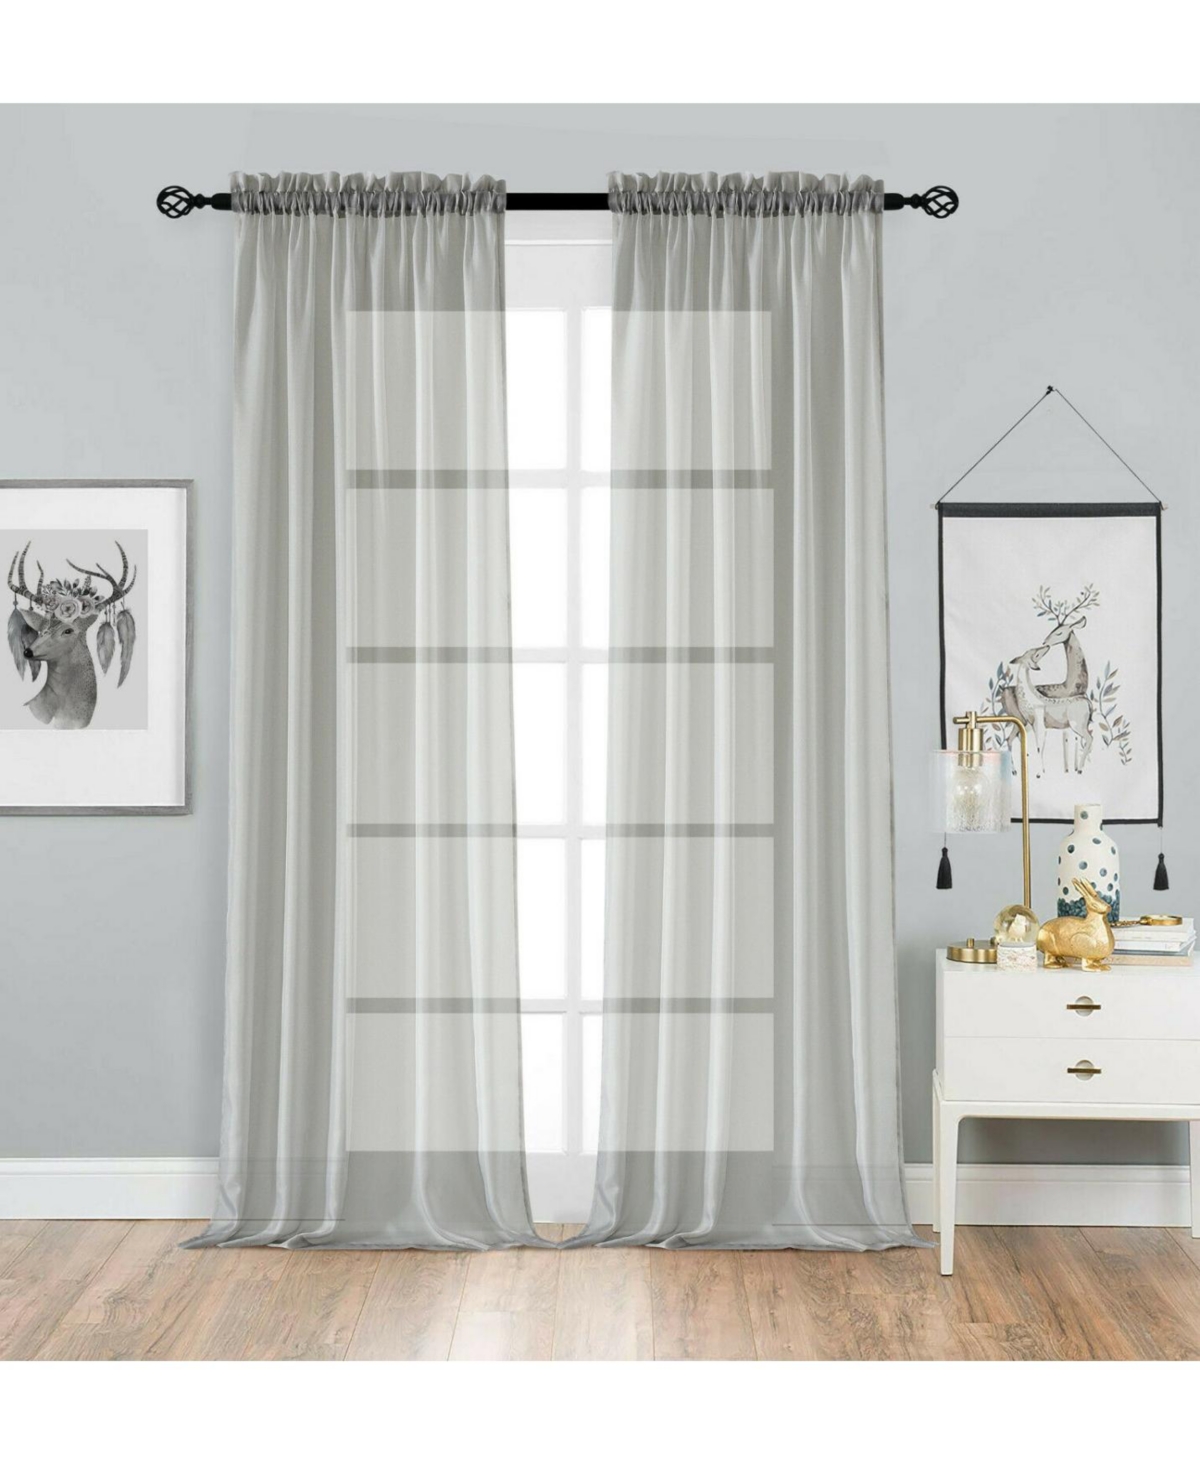 2 Pack Basic Home Rod Pocket Sheer Voile Window Curtains - Ivory